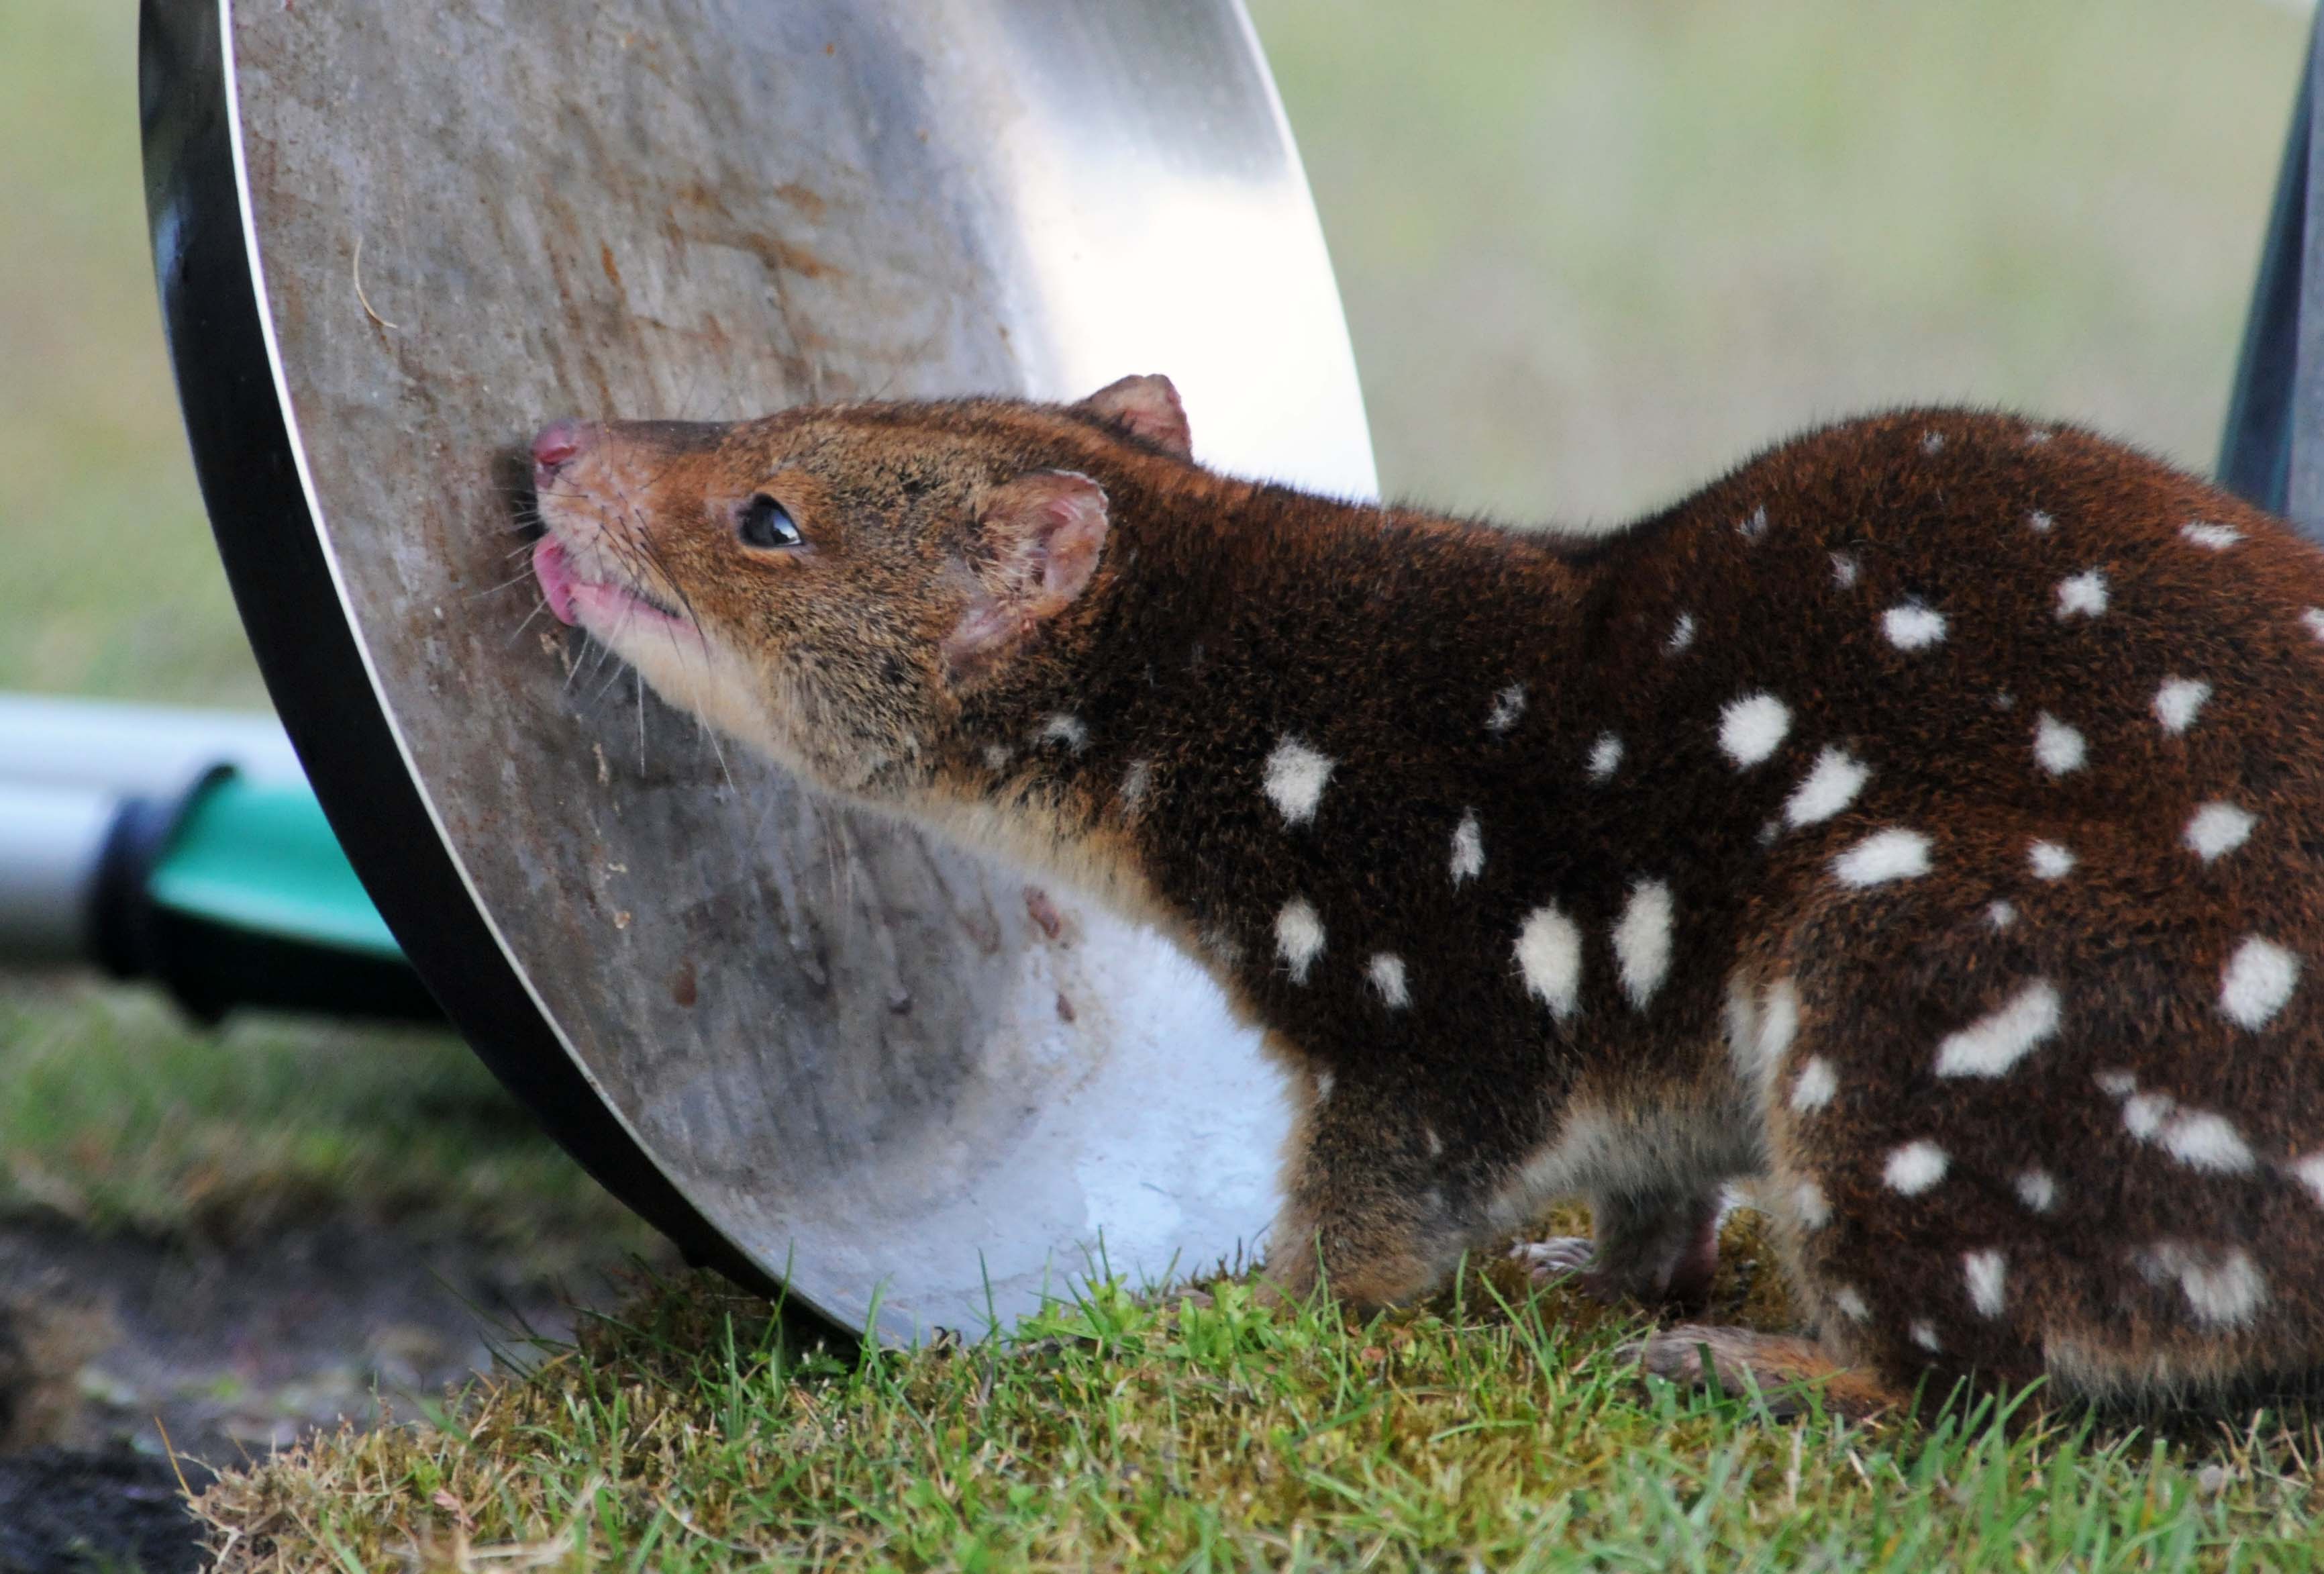  Spotted-tail quoll